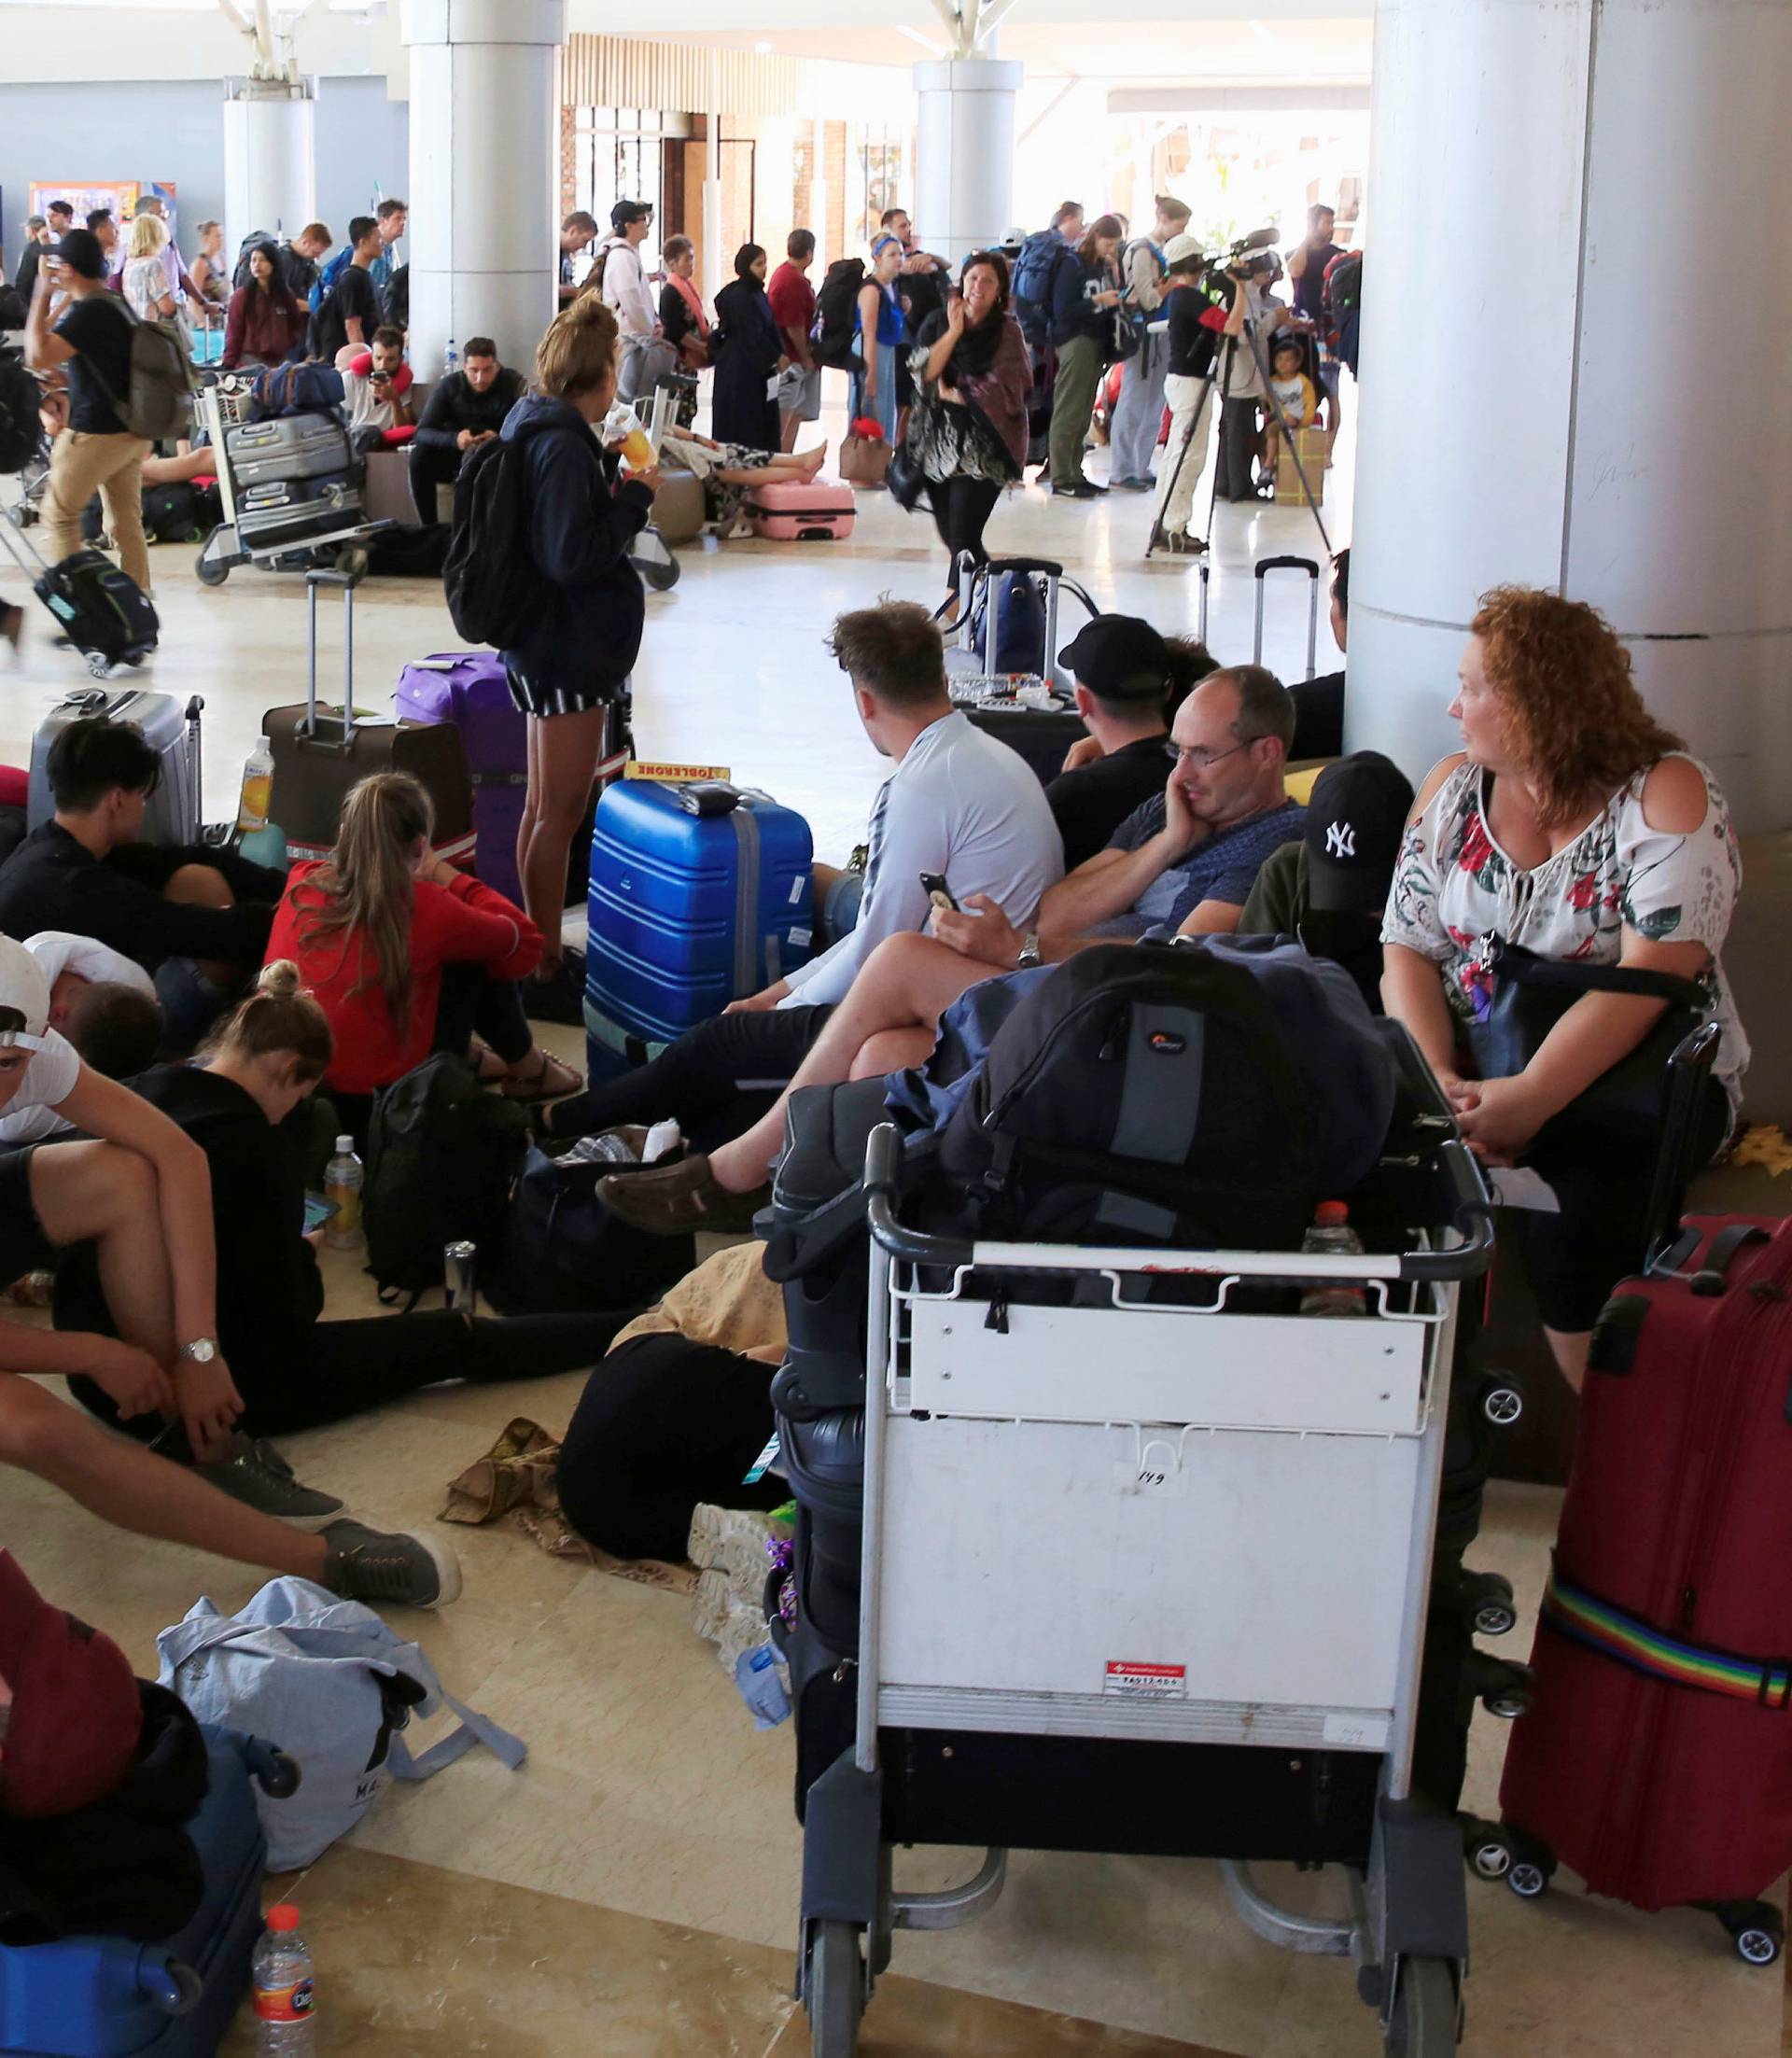 Foreign tourists sit and lie on the floor as they queue to leave Lombok Island after an earthquake hit, as seen at Lombok International Airport, Indonesia